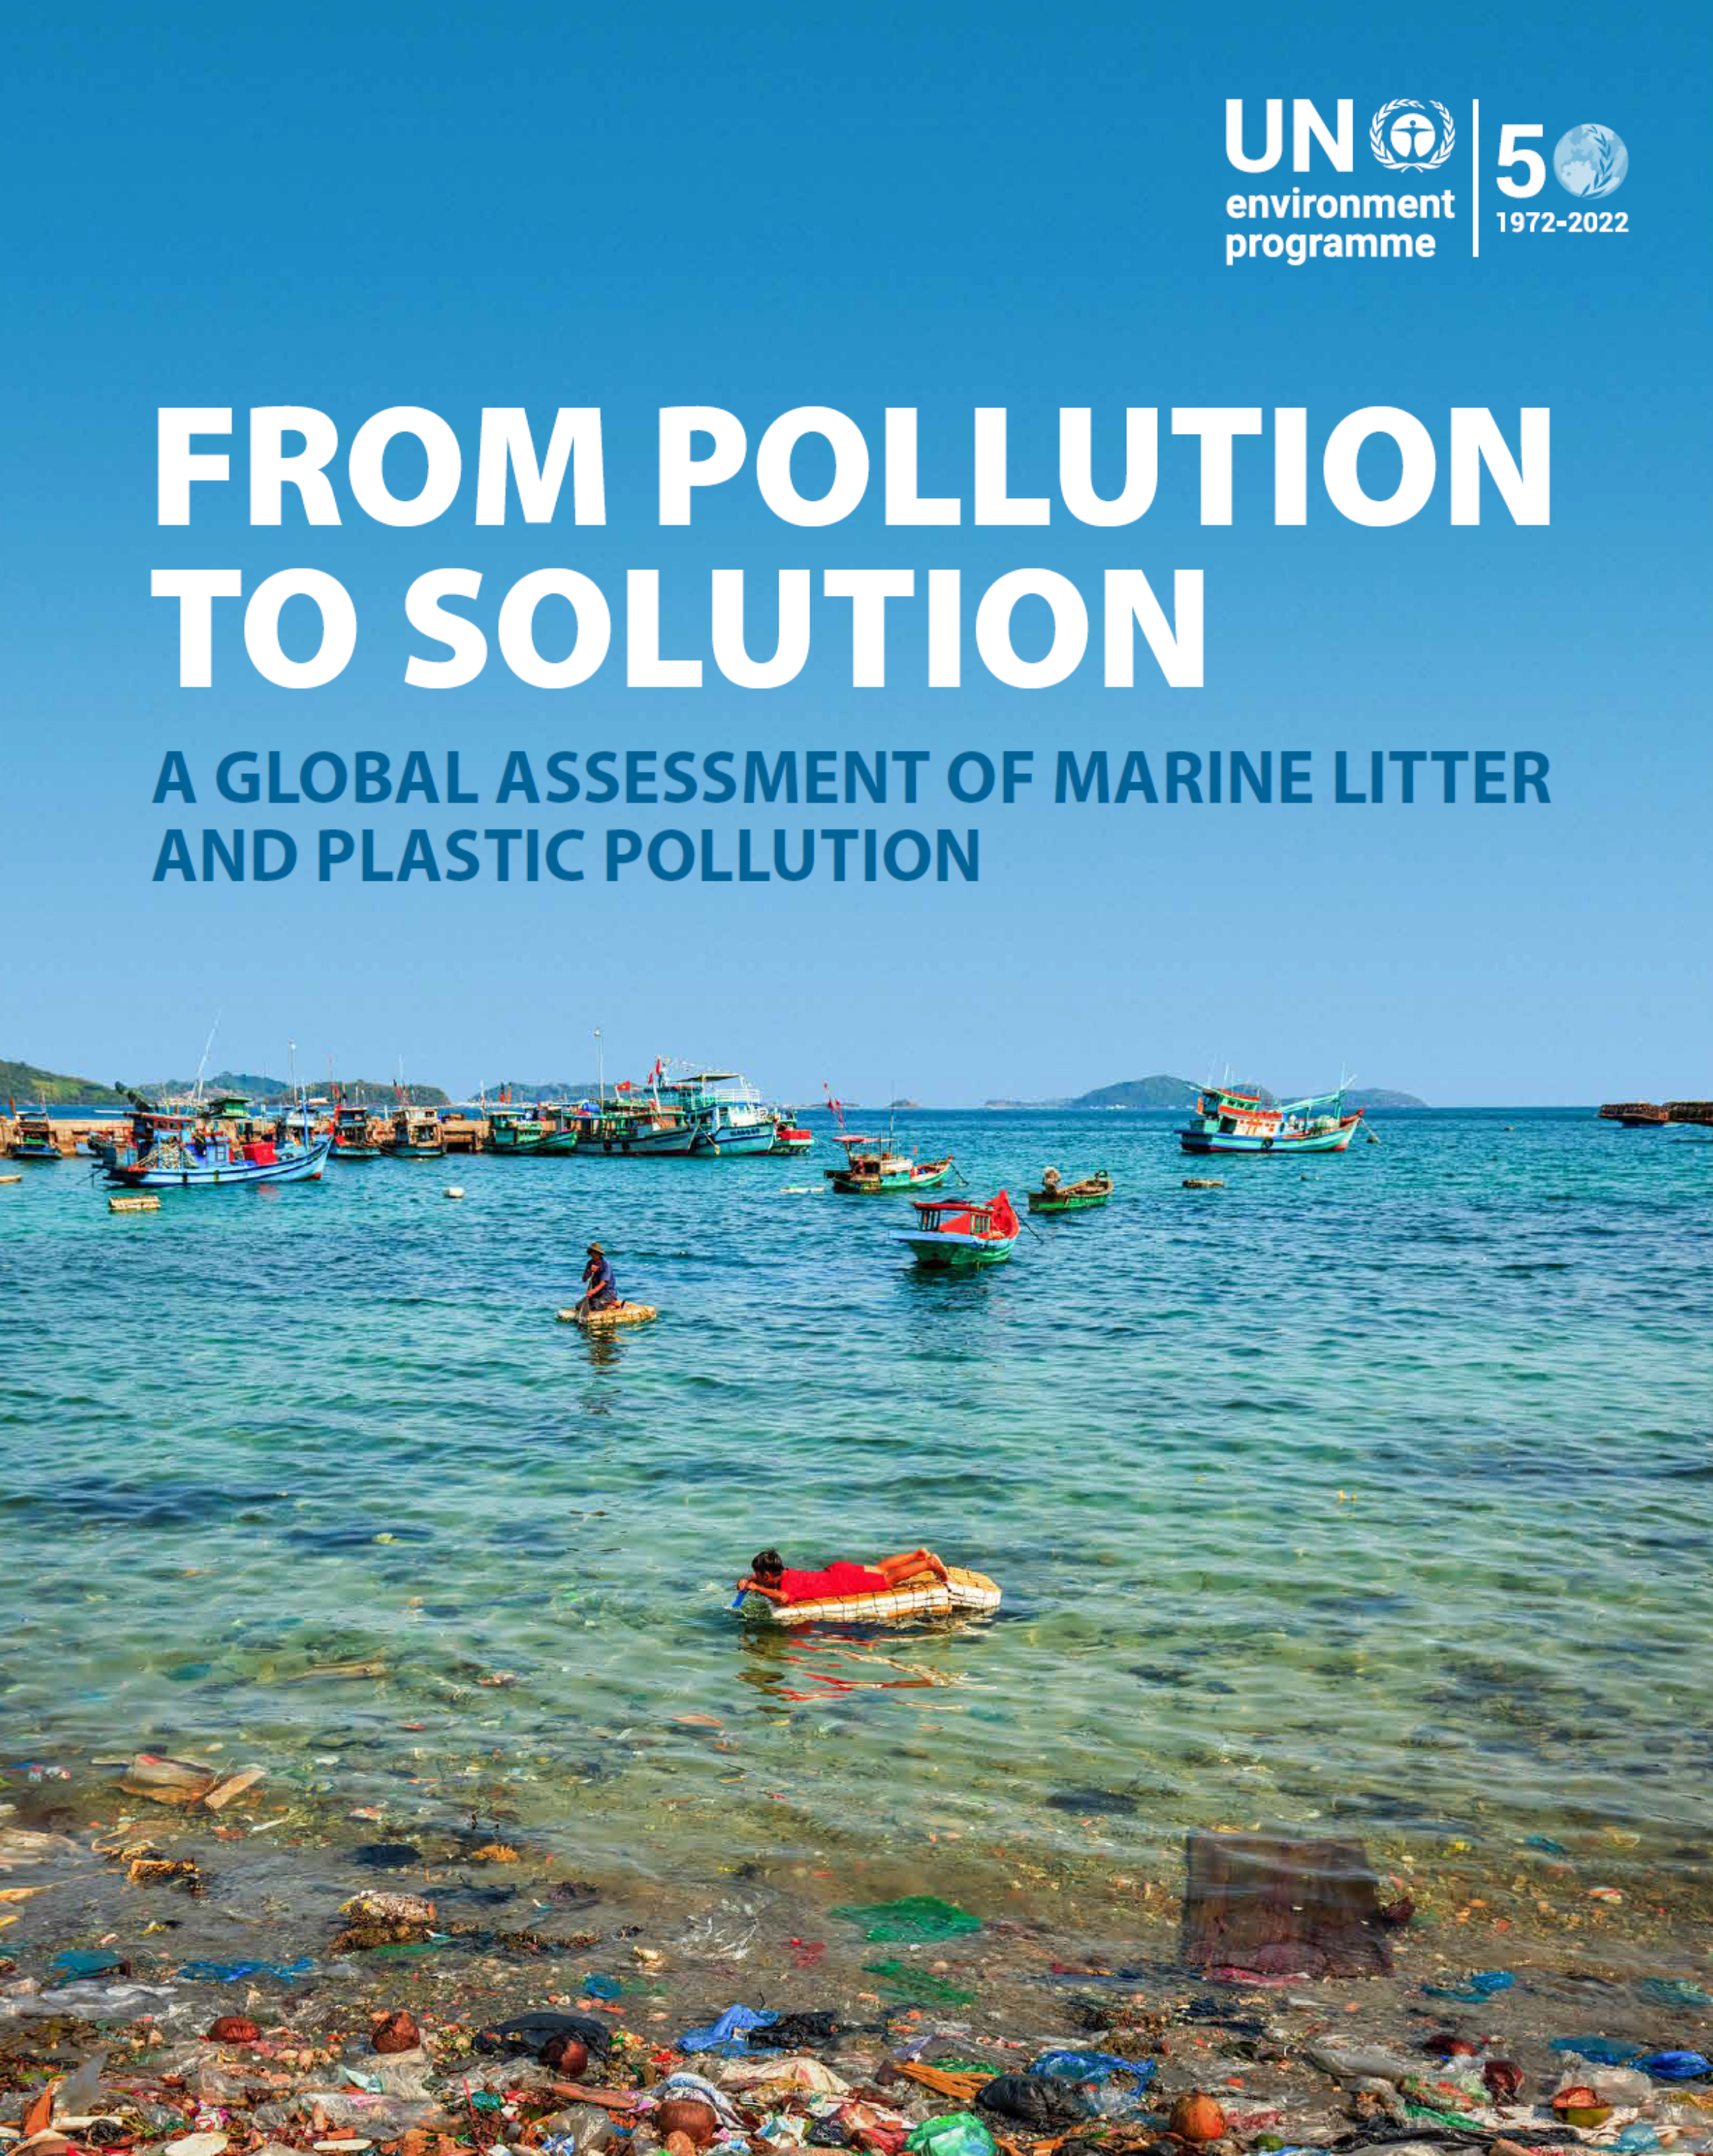 From Pollution to Solution: a global assessment of marine litter and plastic pollution